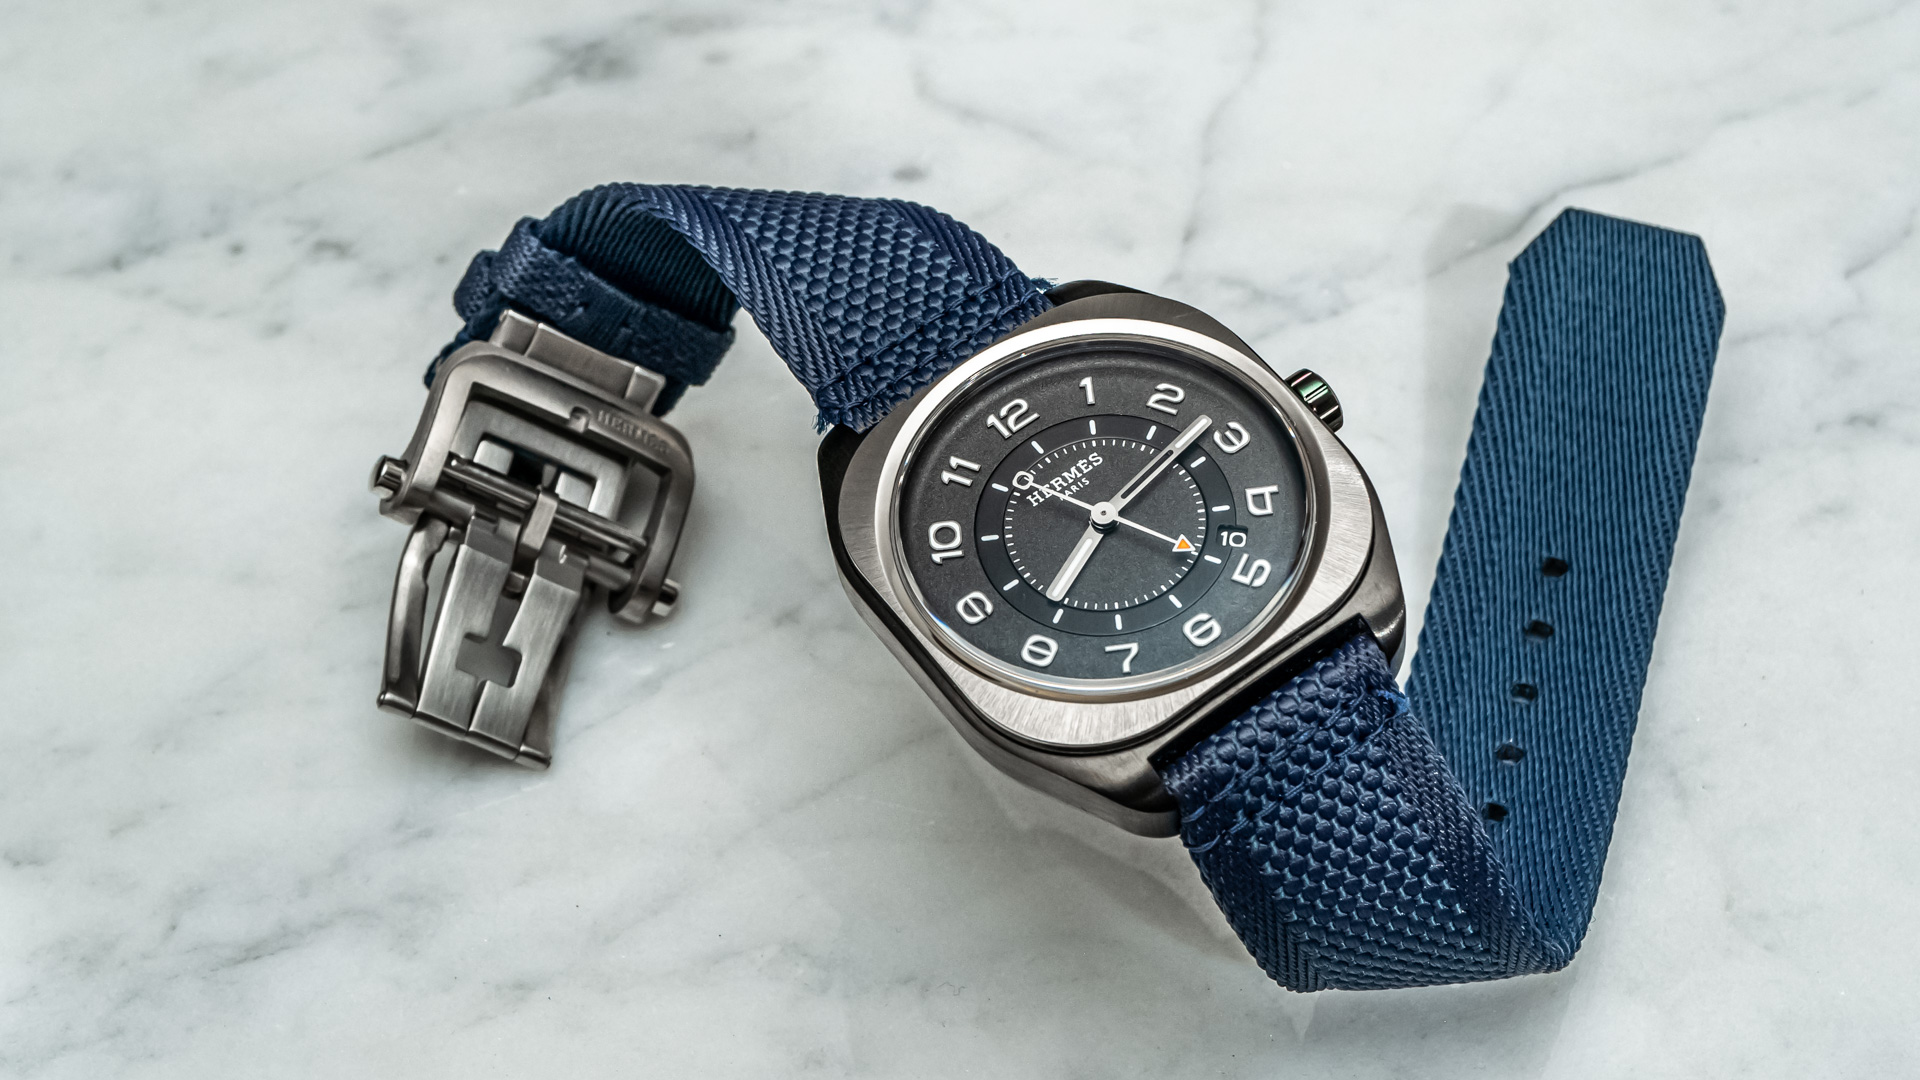 Hands-On Debut: Hermès Launches New H08 Watch Collection